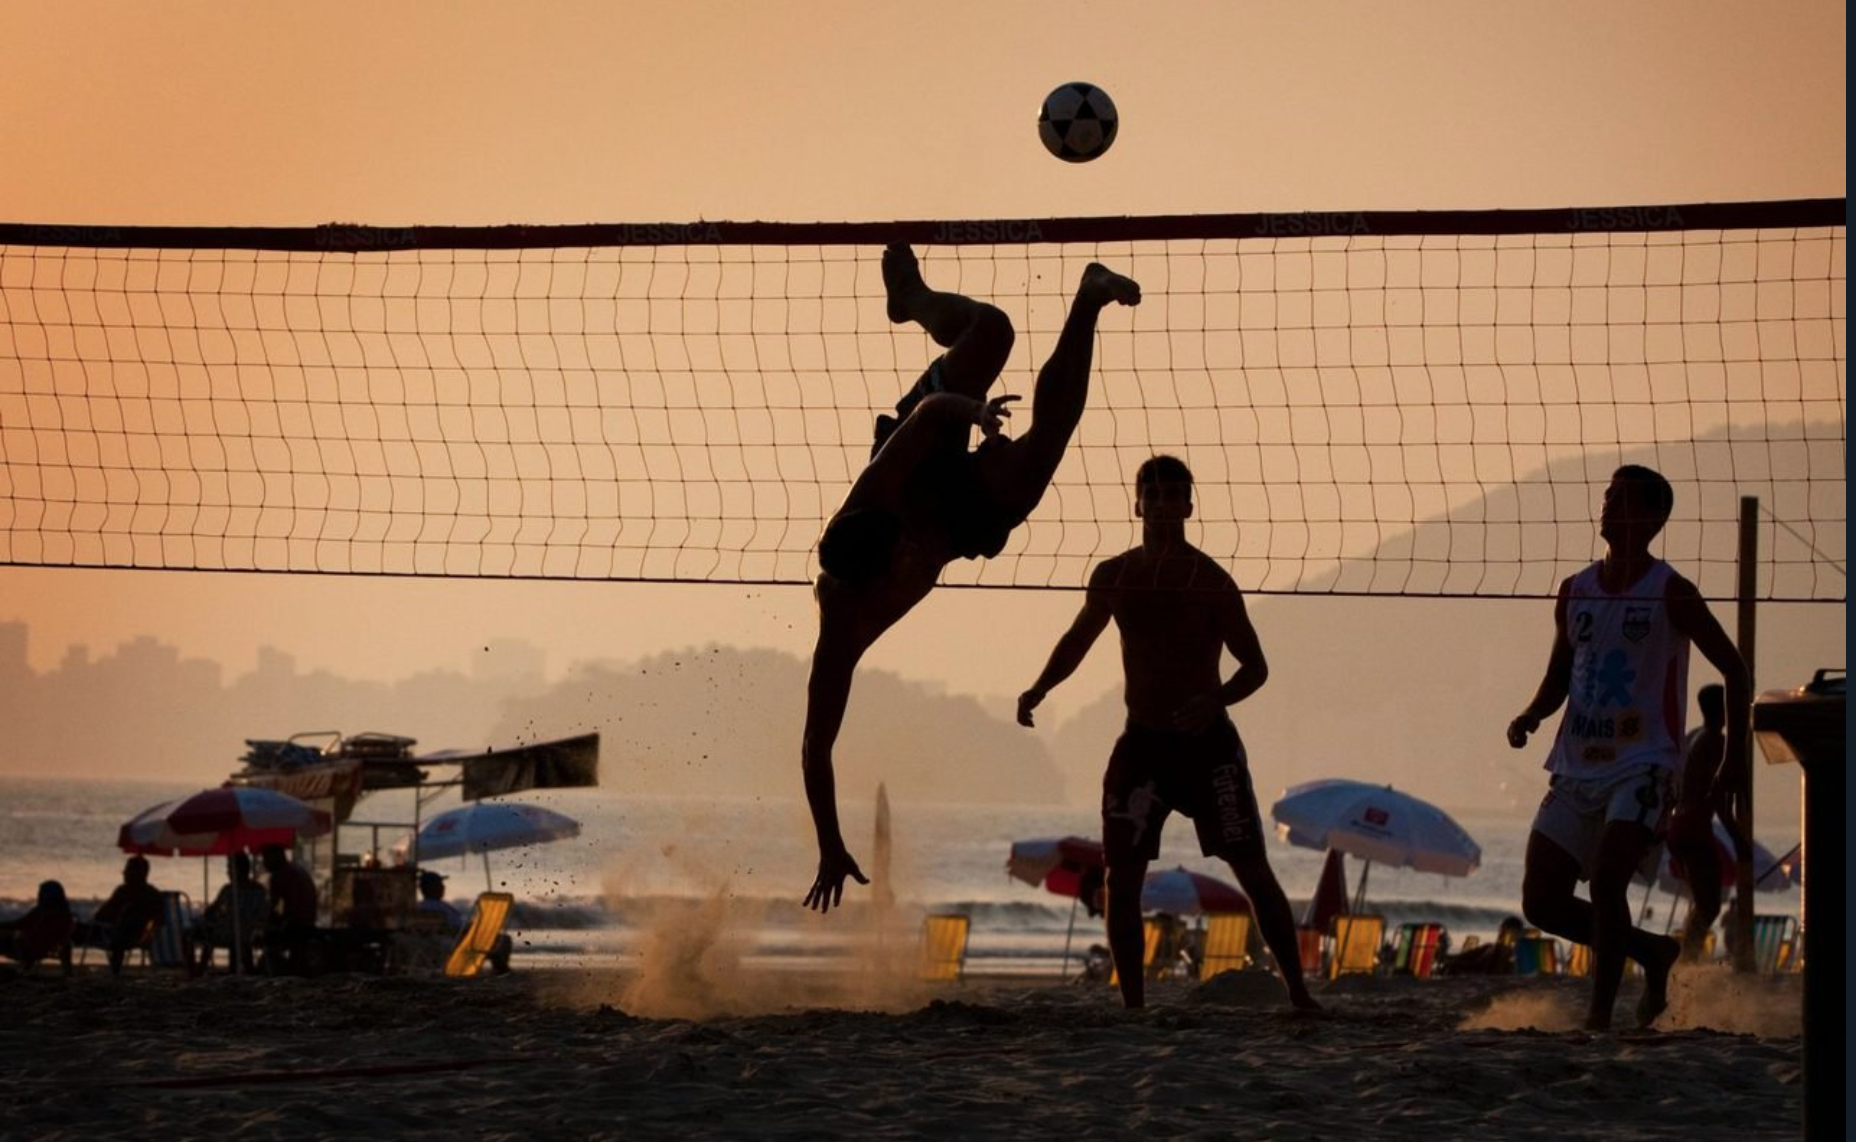 footvolley-the-hybrid-volleyball-soccer-game